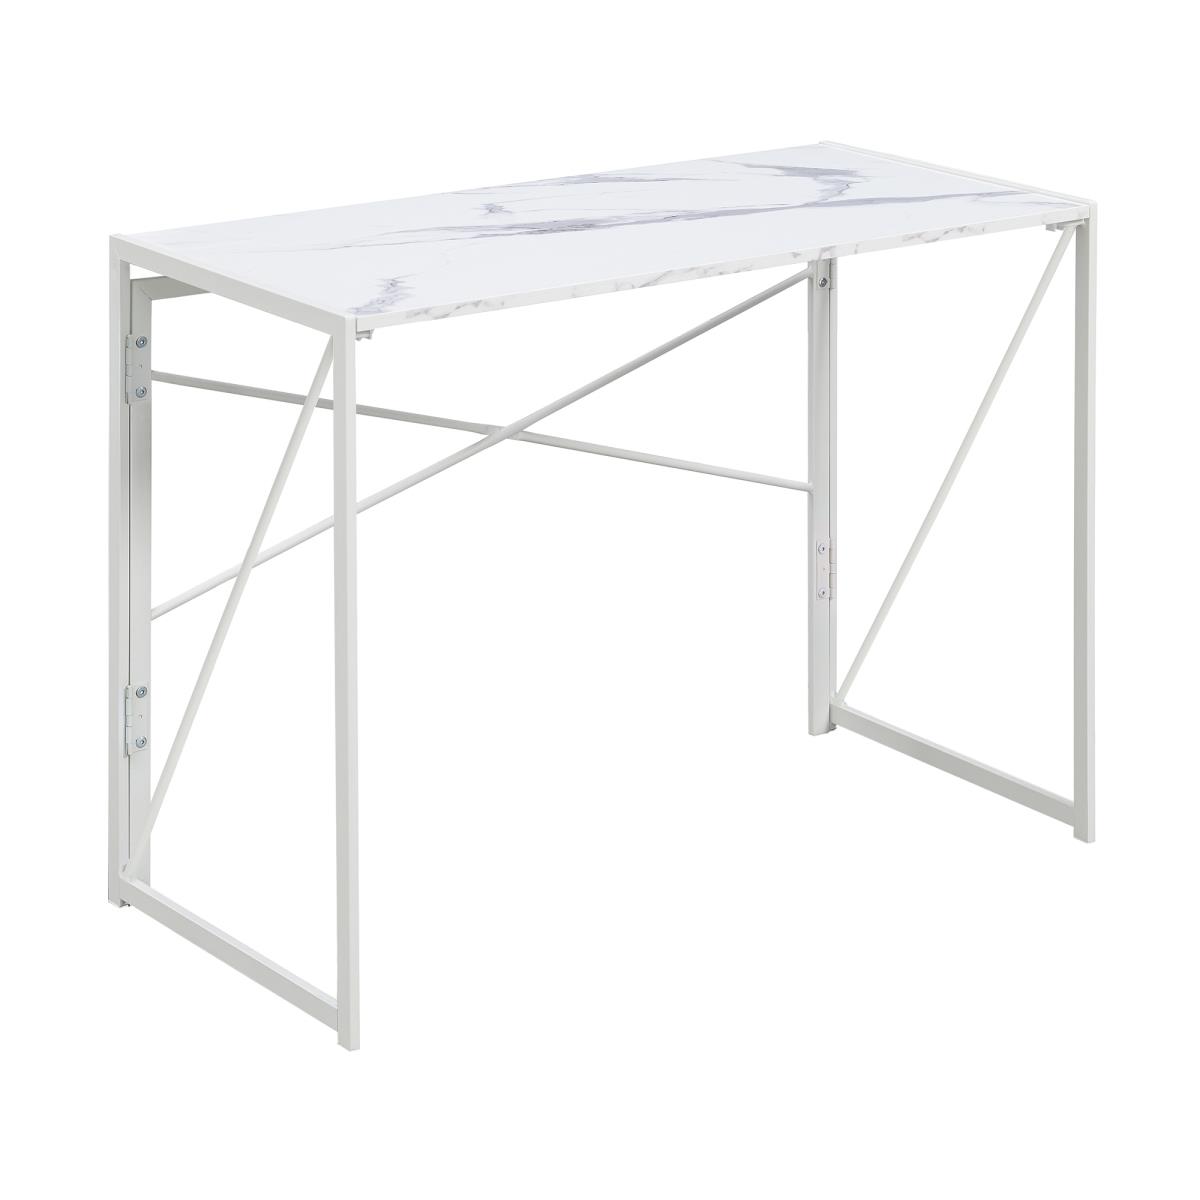 Picture of Convenience Concepts 090110WMWF 39.5 x 19.75 x 29 in. Xtra Folding Desk